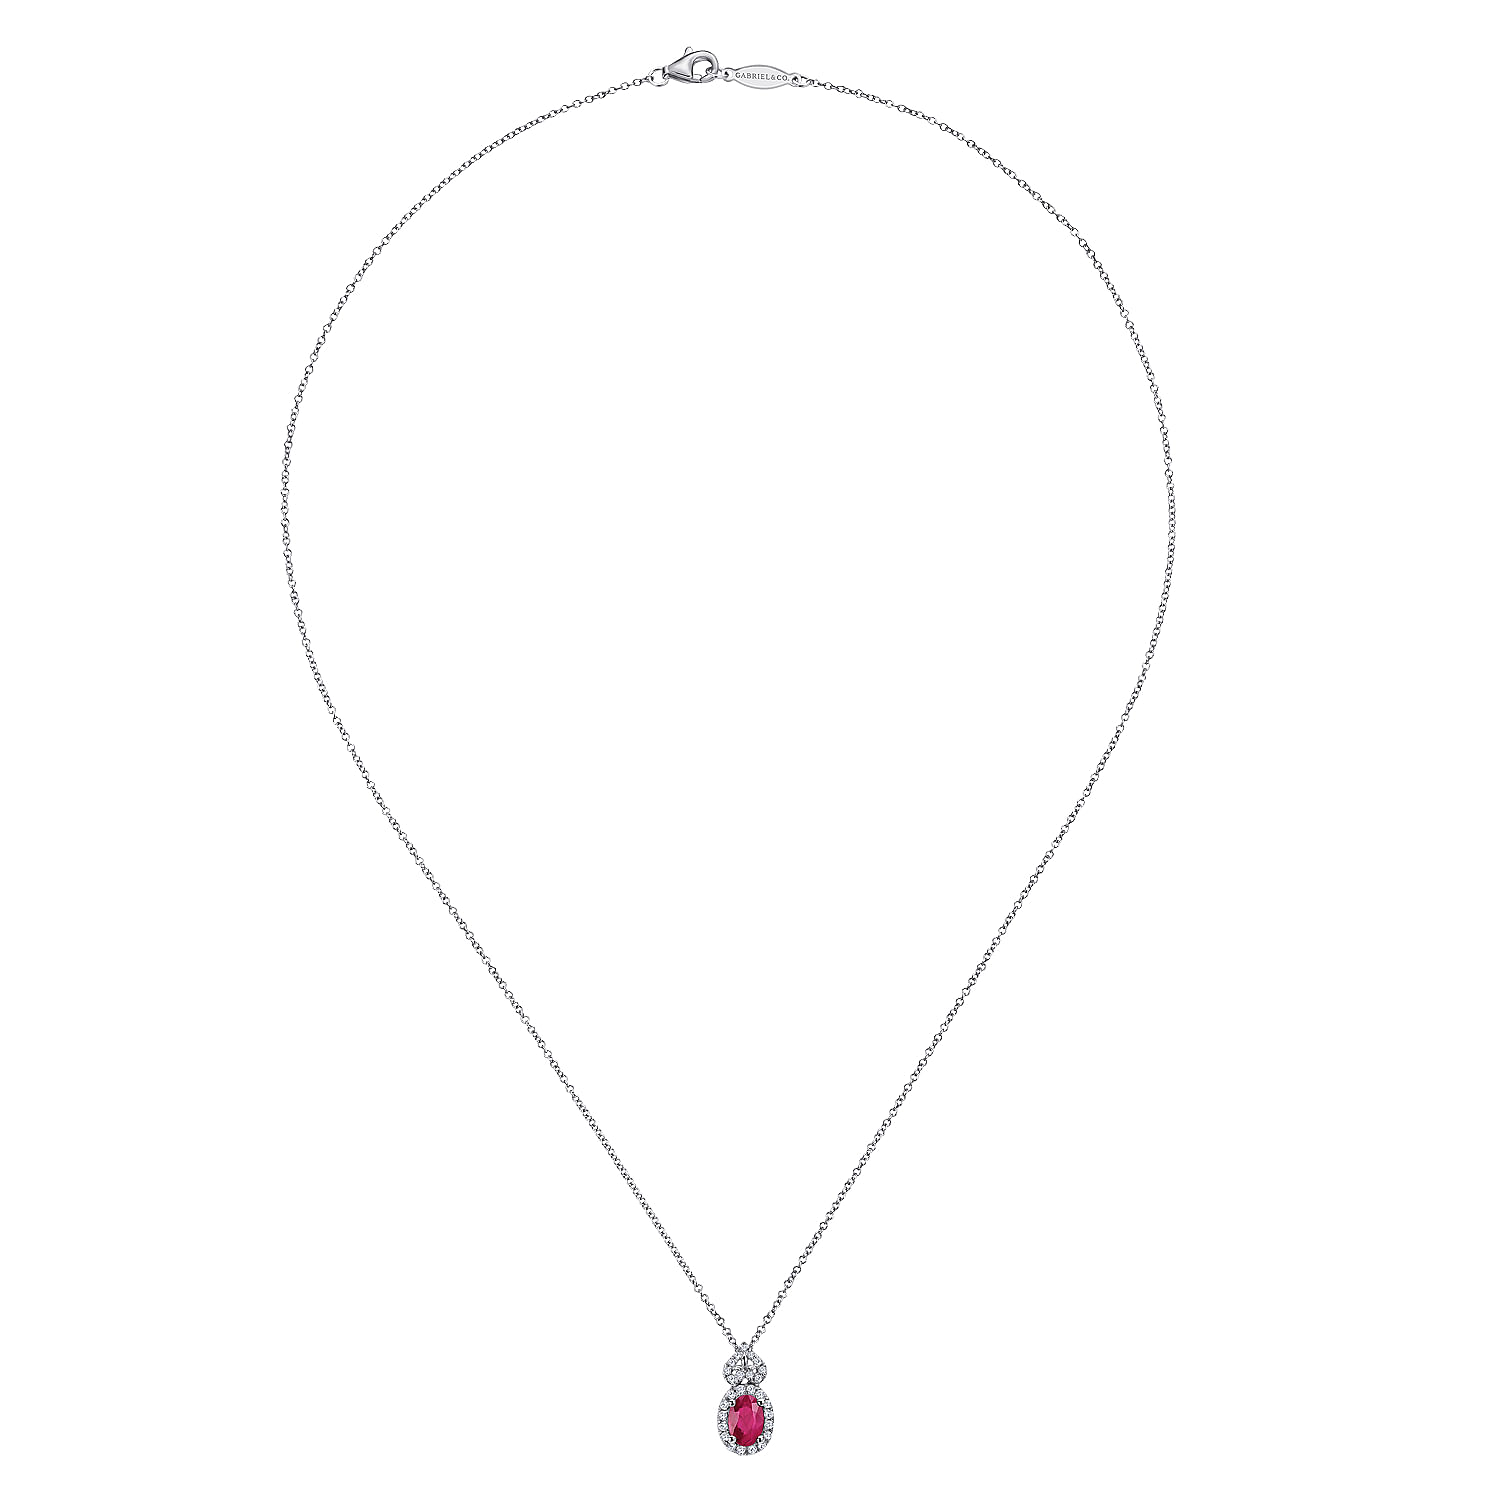 14K White Gold Oval Ruby and Diamond Halo Pendant Necklace